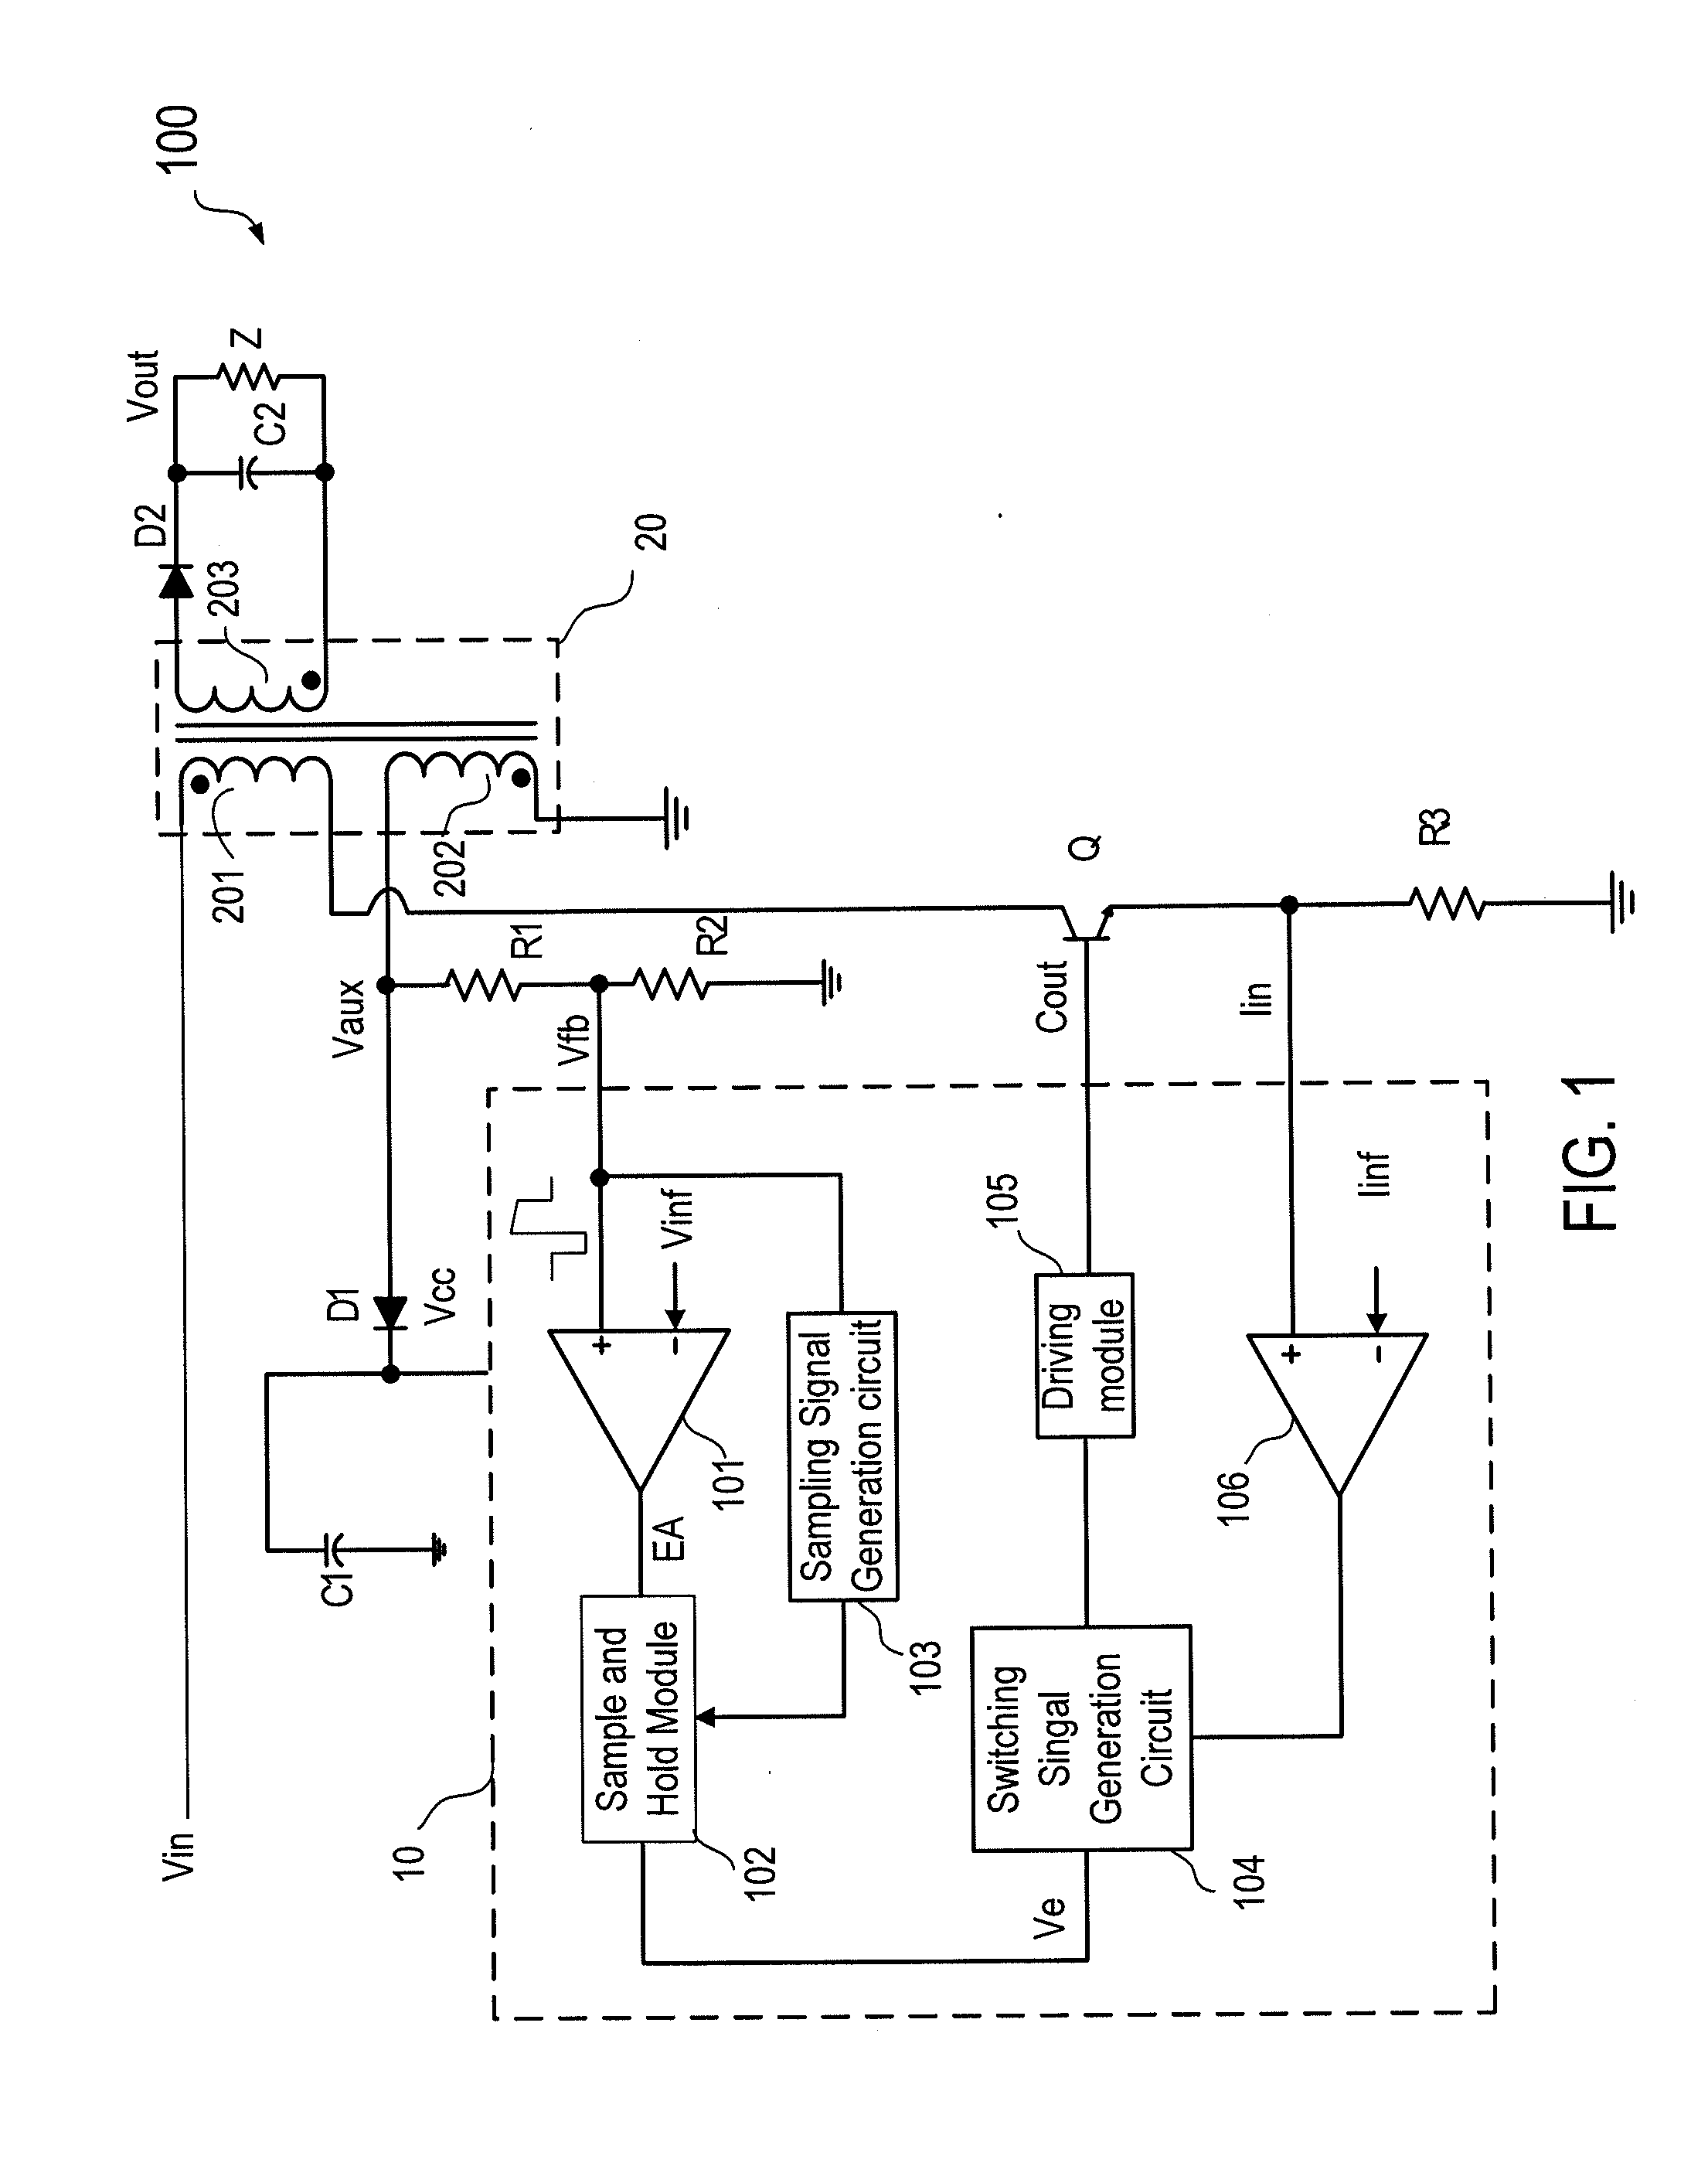 Control circuit for primary side control of switching power supply